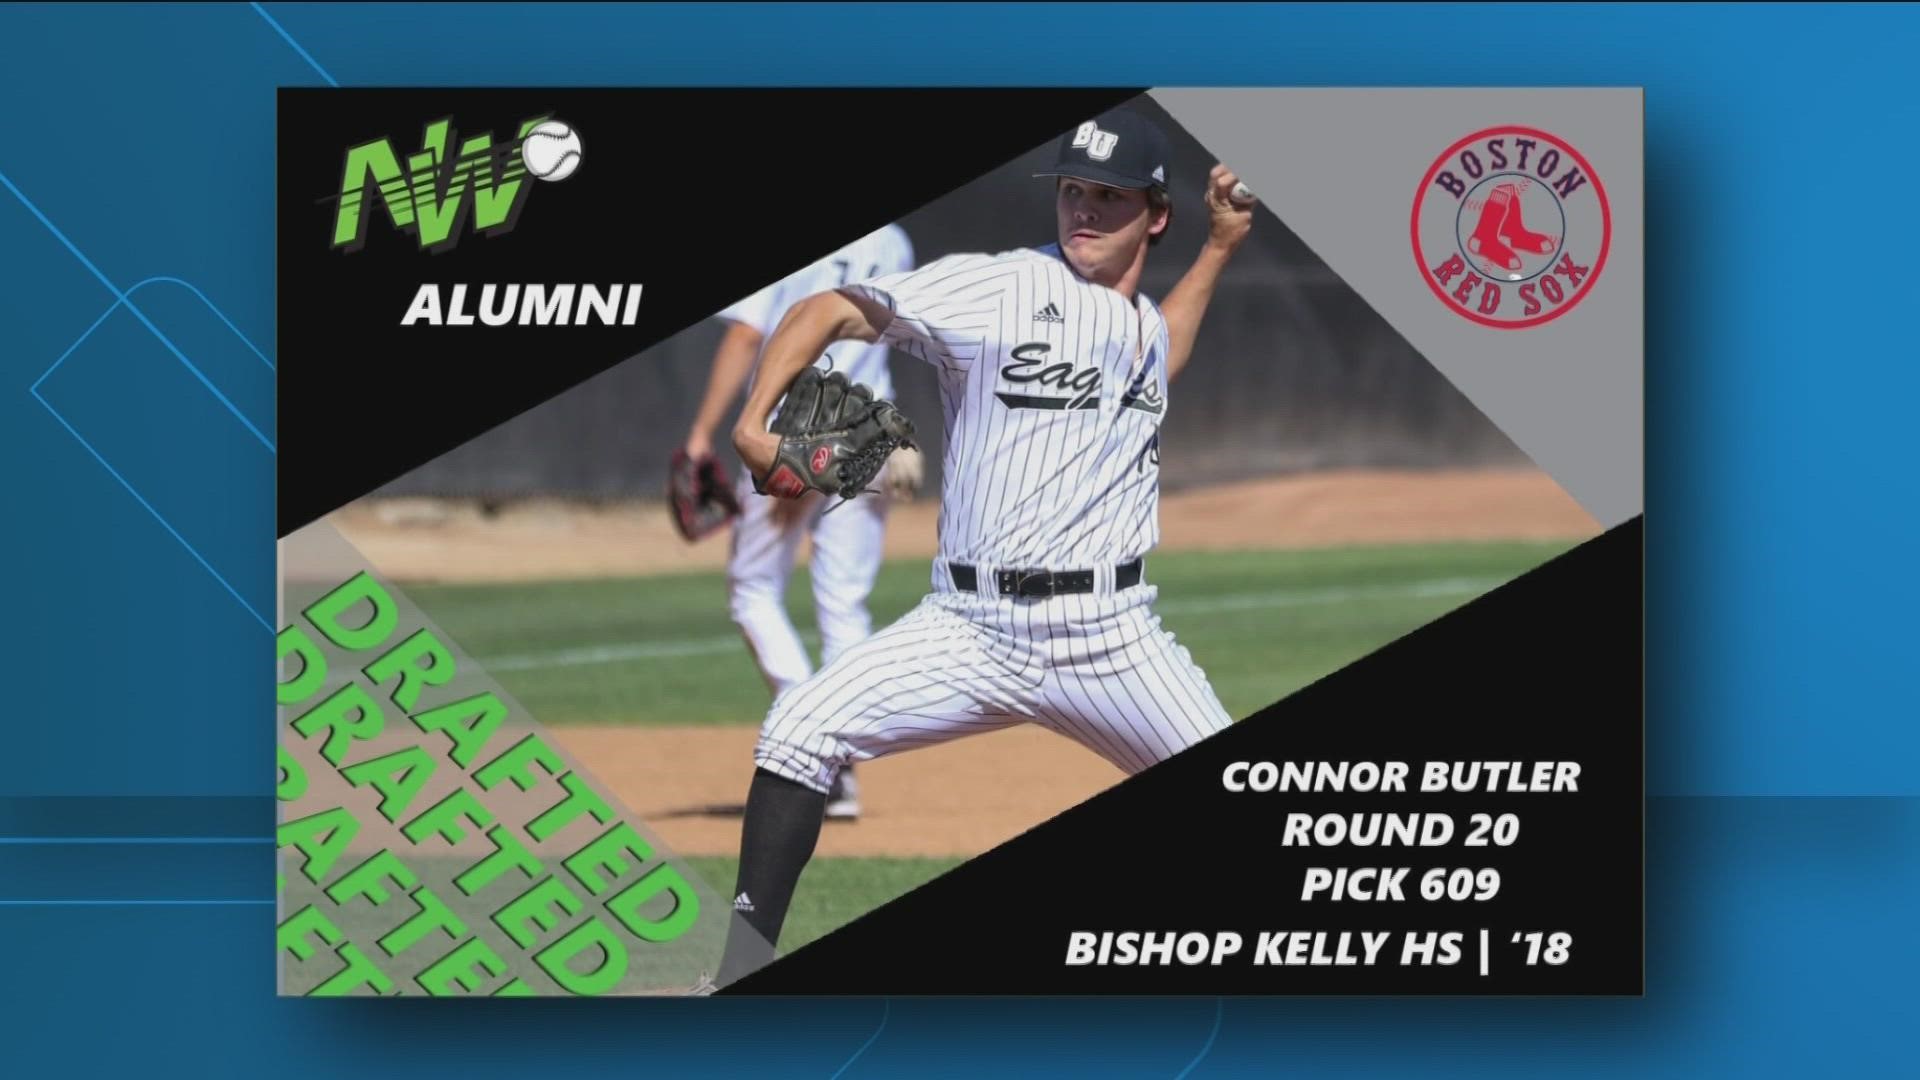 In the MLB Draft on Tuesday, the Oakland Athletics selected Coeur d'Alene native Jake Pfennigs and the Boston Red Sox selected Bishop Kelly alum Connor Butler.